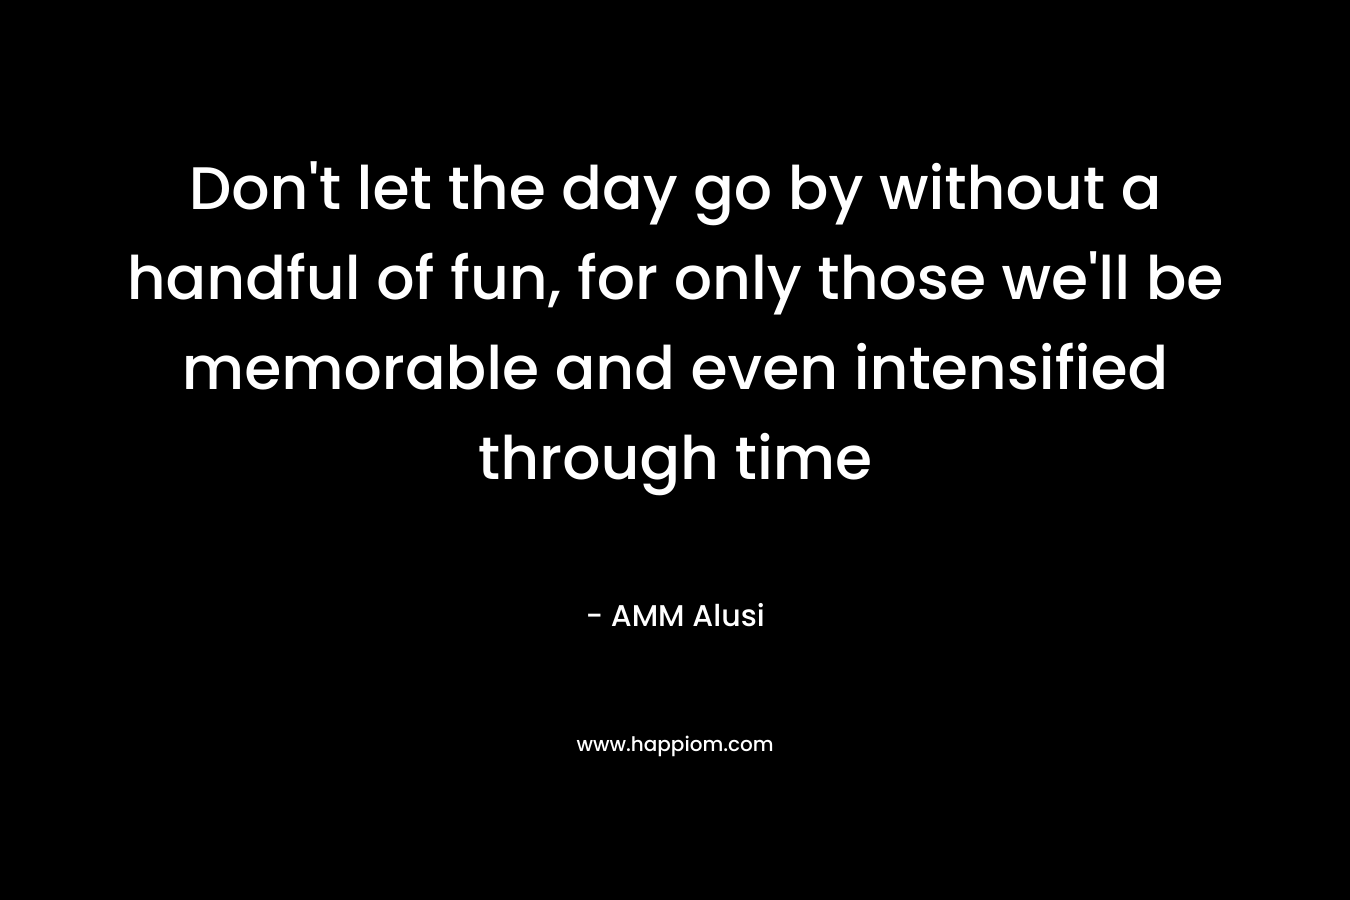 Don't let the day go by without a handful of fun, for only those we'll be memorable and even intensified through time